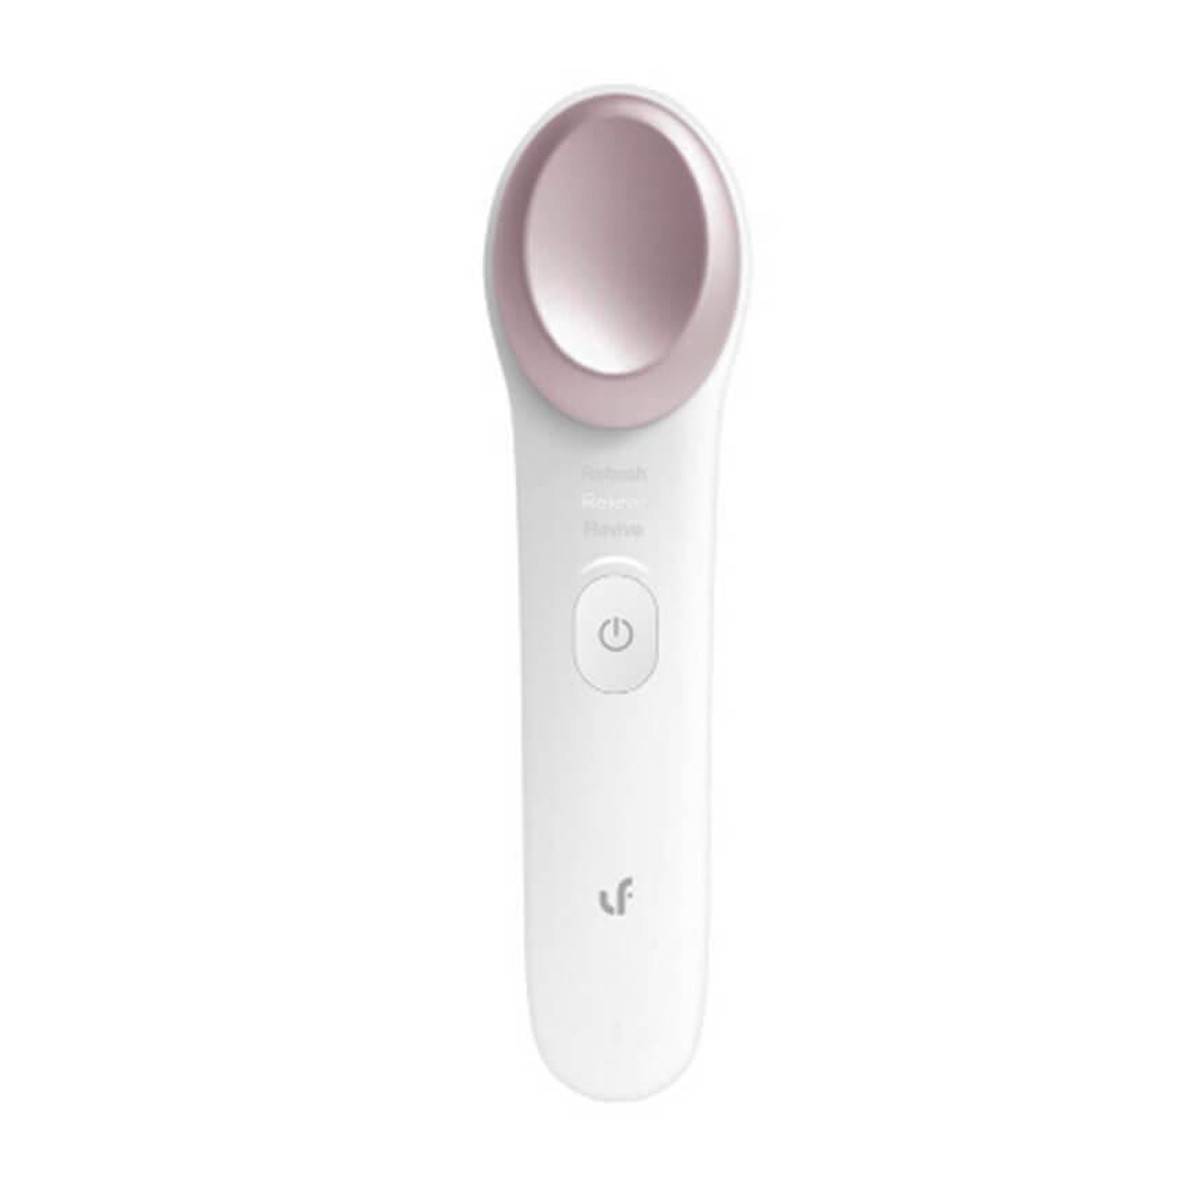 Xiaomi глазок. Lefan Automatic Eye hot and Cold massage White. Массажёр для глаз Xiaomi. Массажер для глаз FC-3002. Вибромассажер Xiaomi.